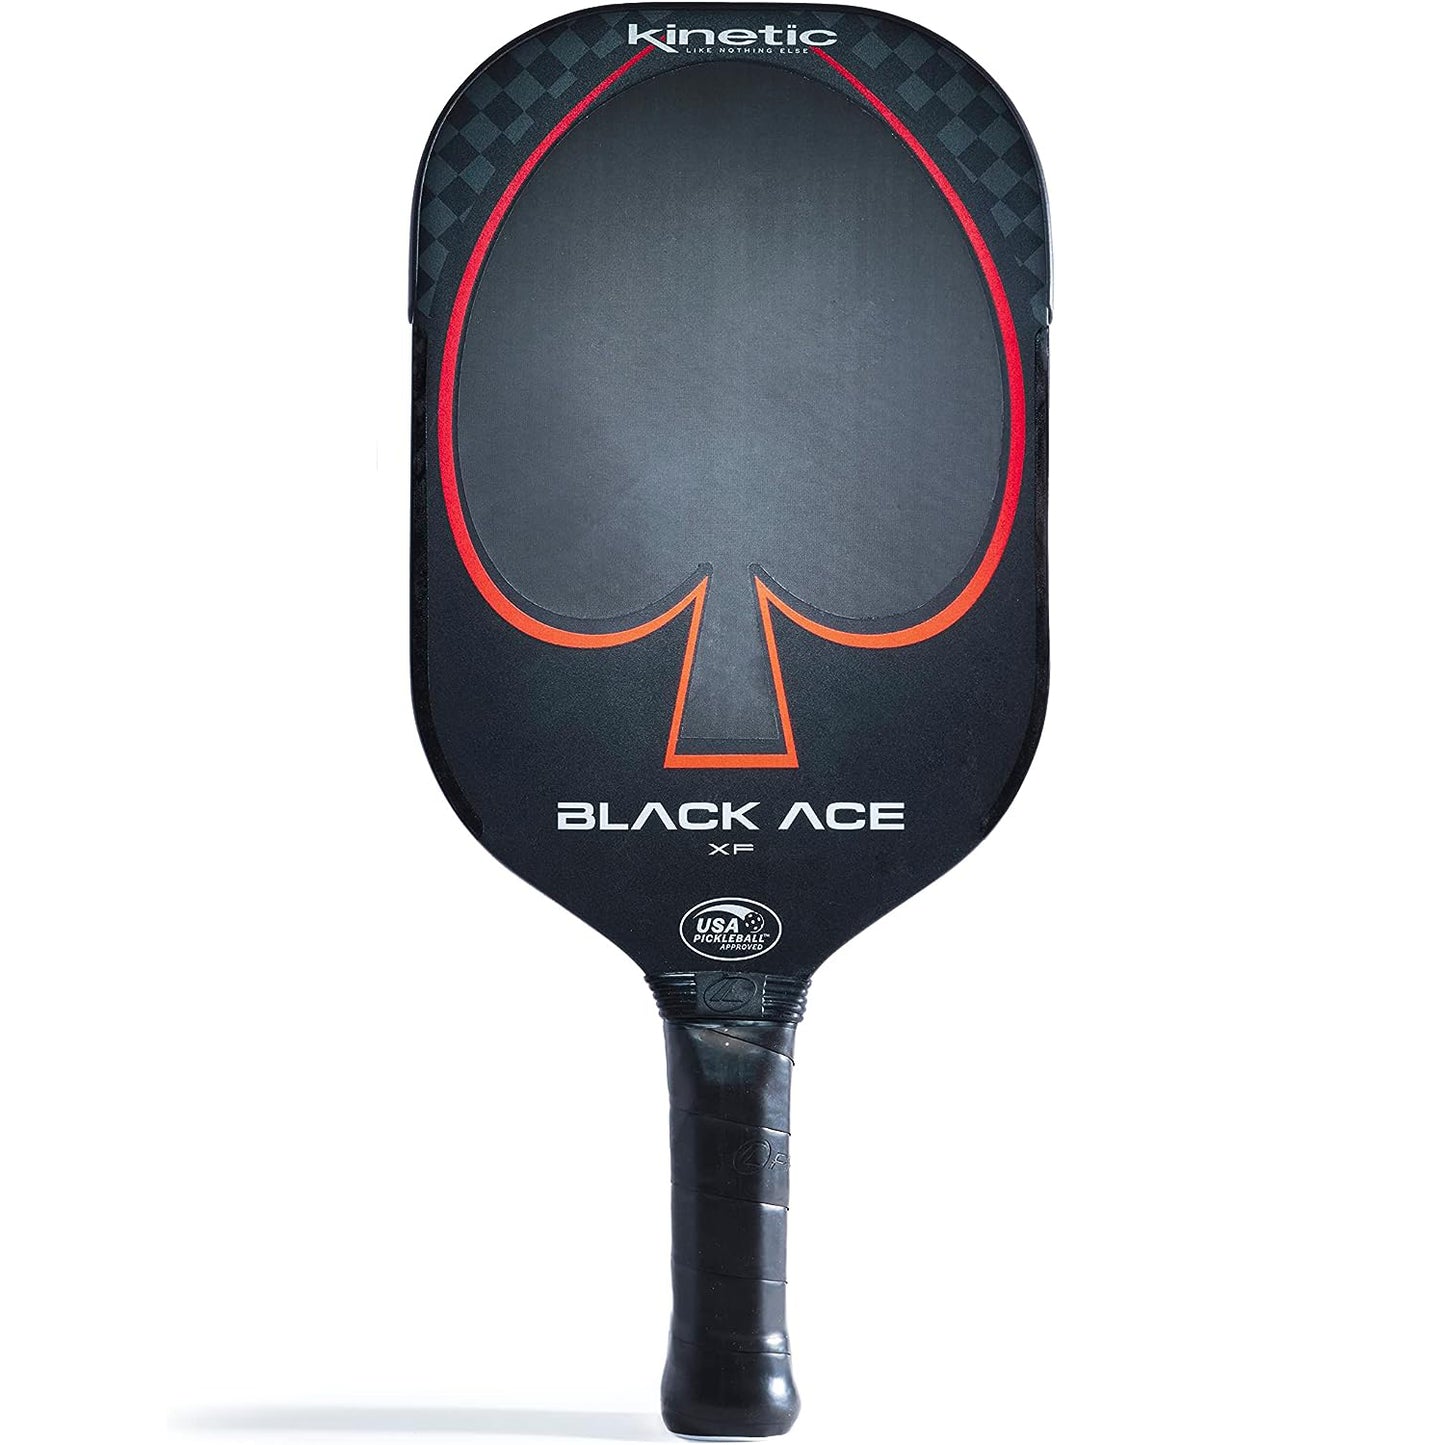 PROKENNEX Black Ace XF - Pickleball Paddle with Toray 700 Carbon Fiber Face - Comfort Pro Grip - USAPA Approved (Cover not Included)